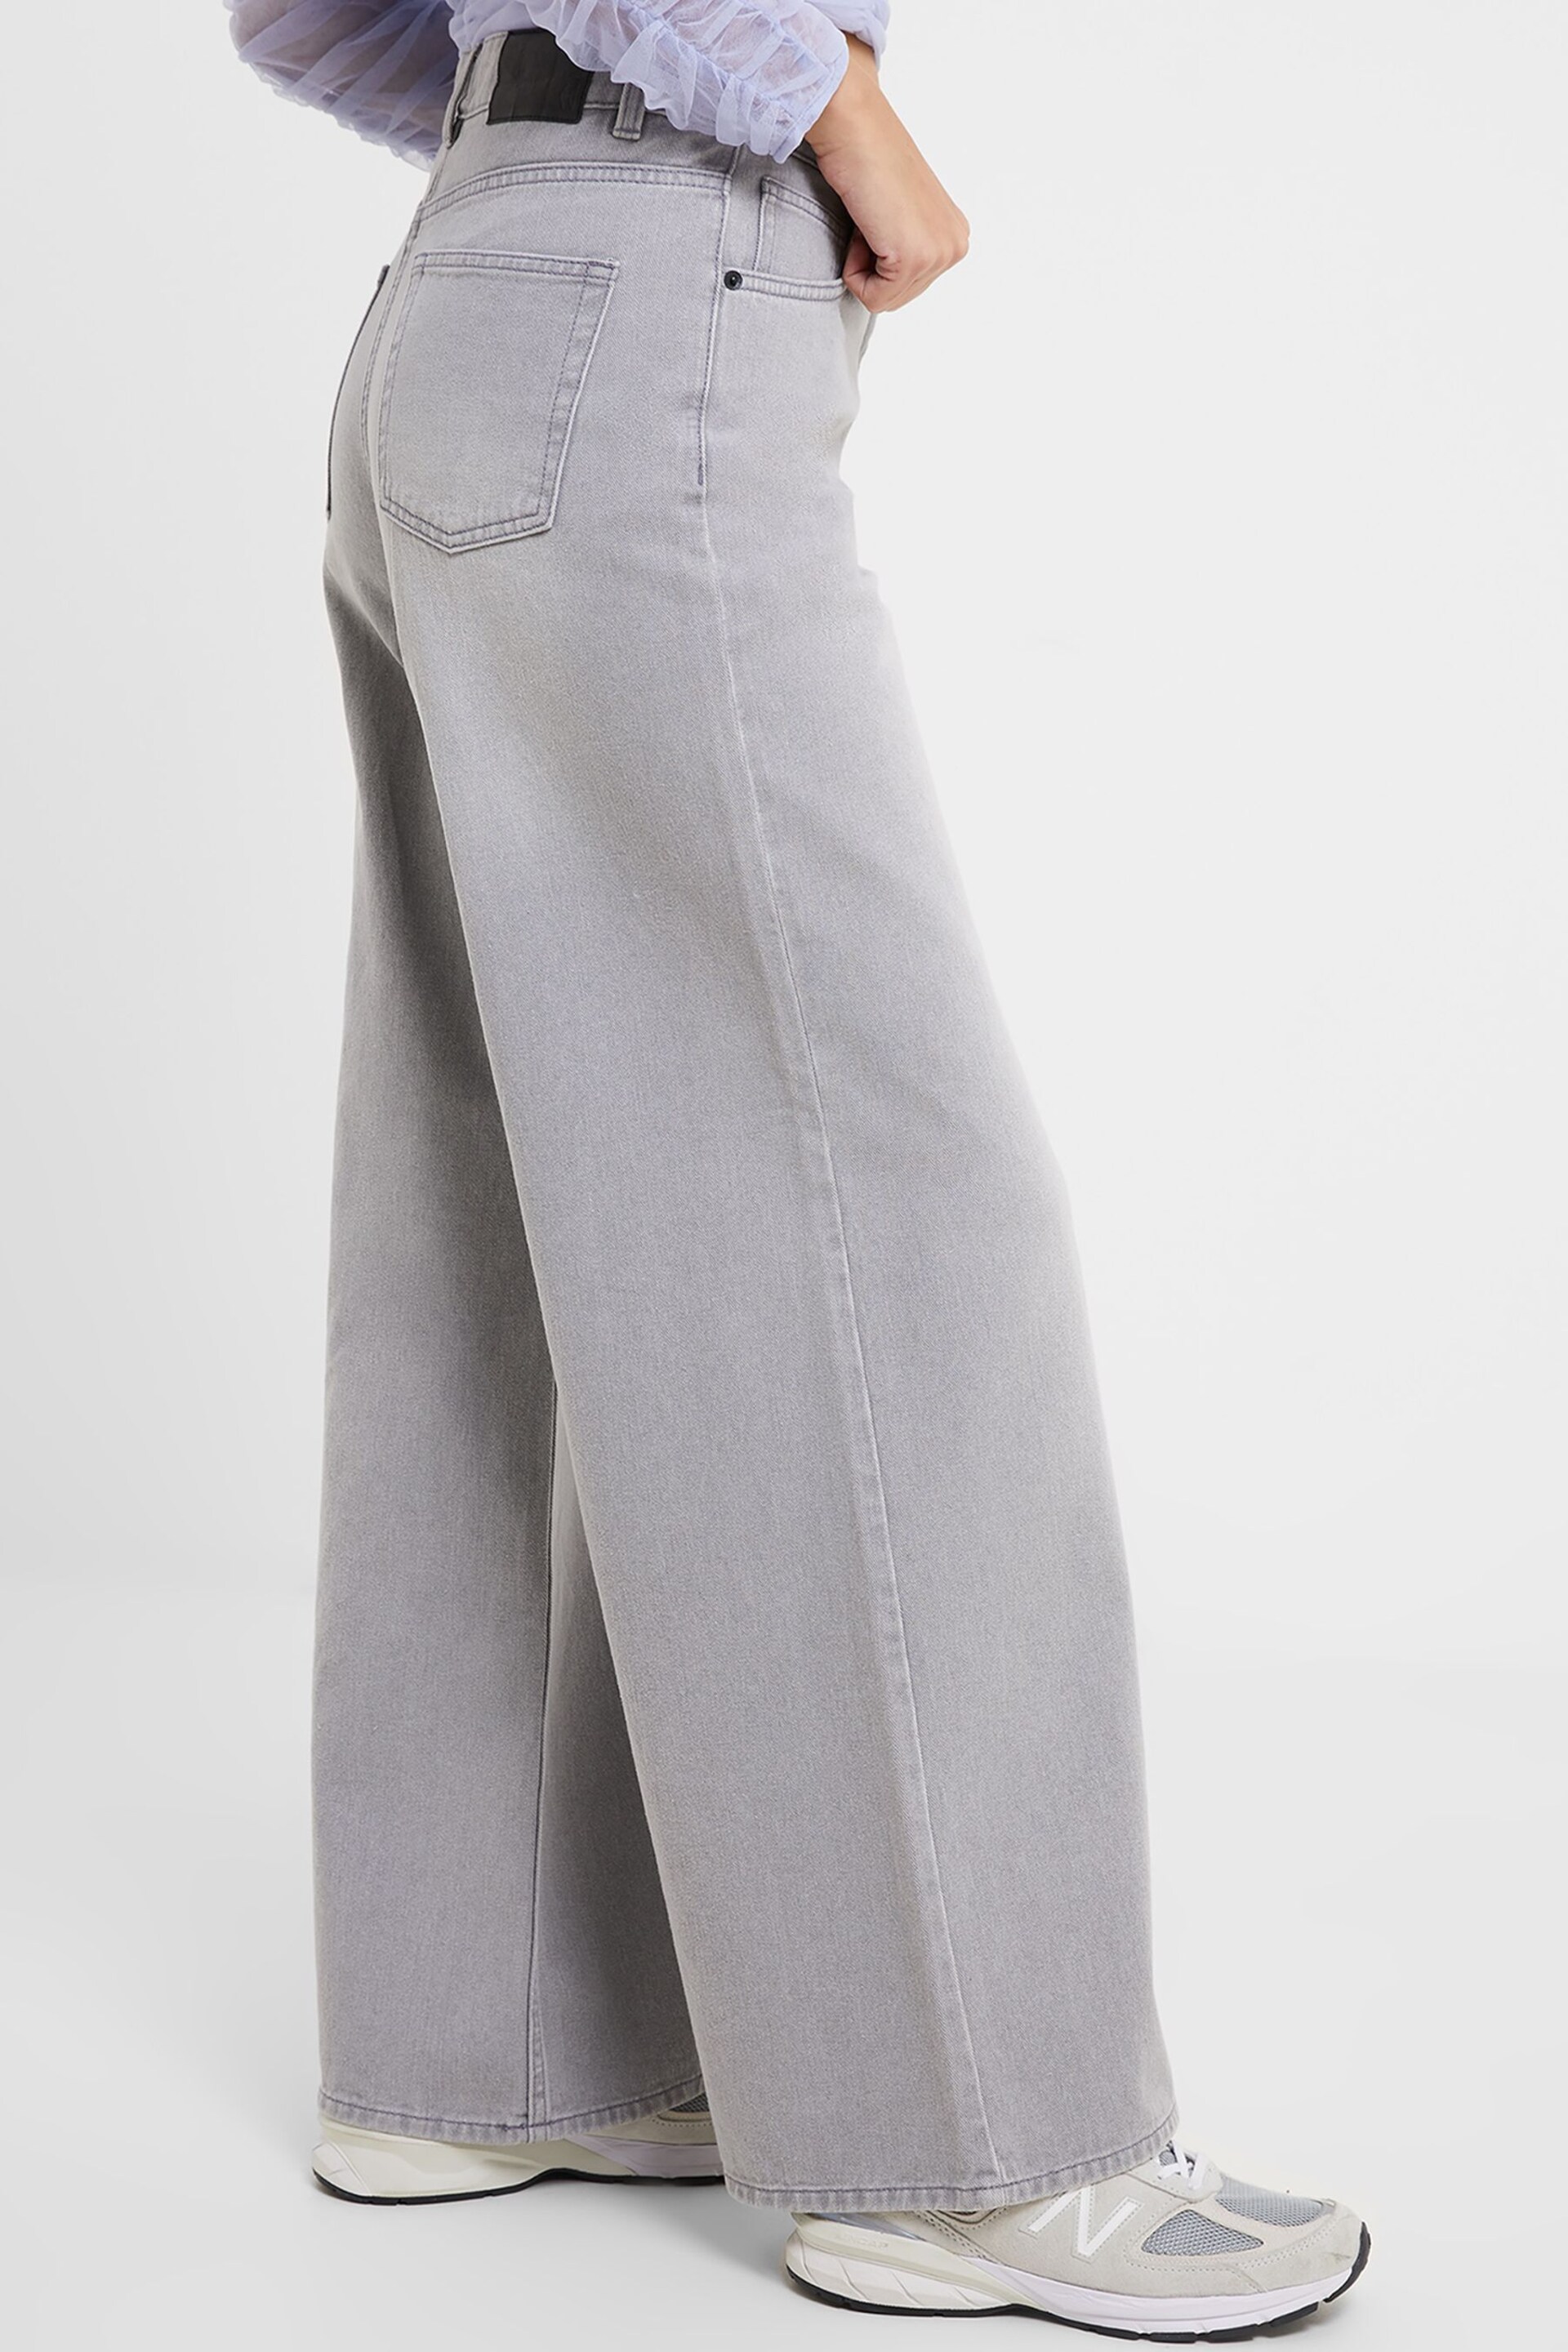 French Connection Relaxed Denver Denim Wide Leg Jeans - Image 3 of 4